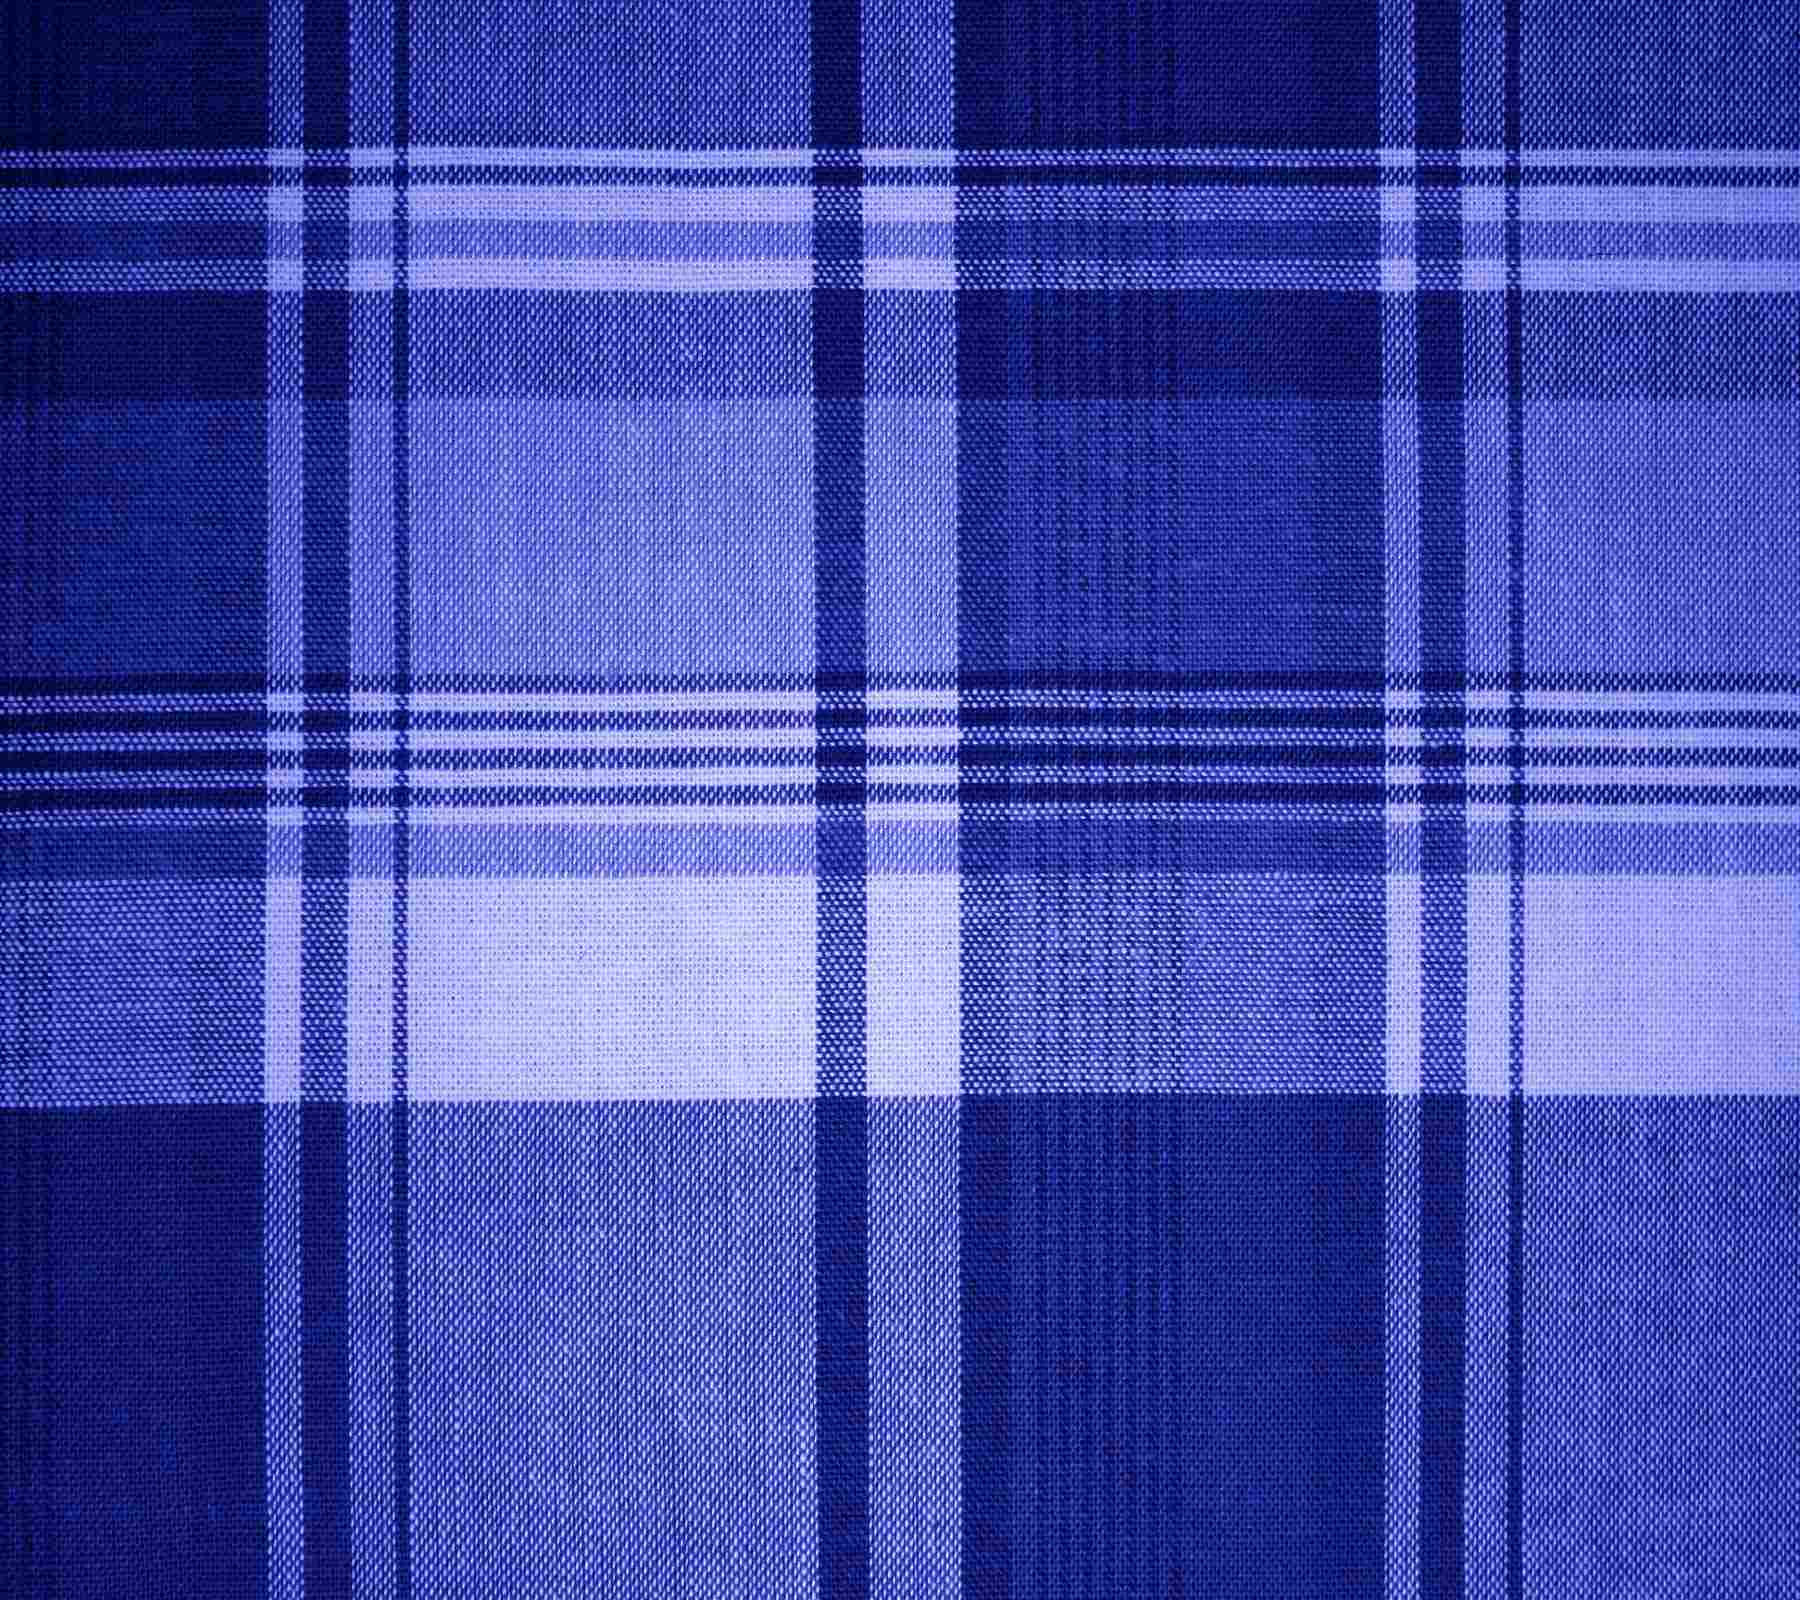 Blue Plaid Fabric Background Image Wallpaper Or